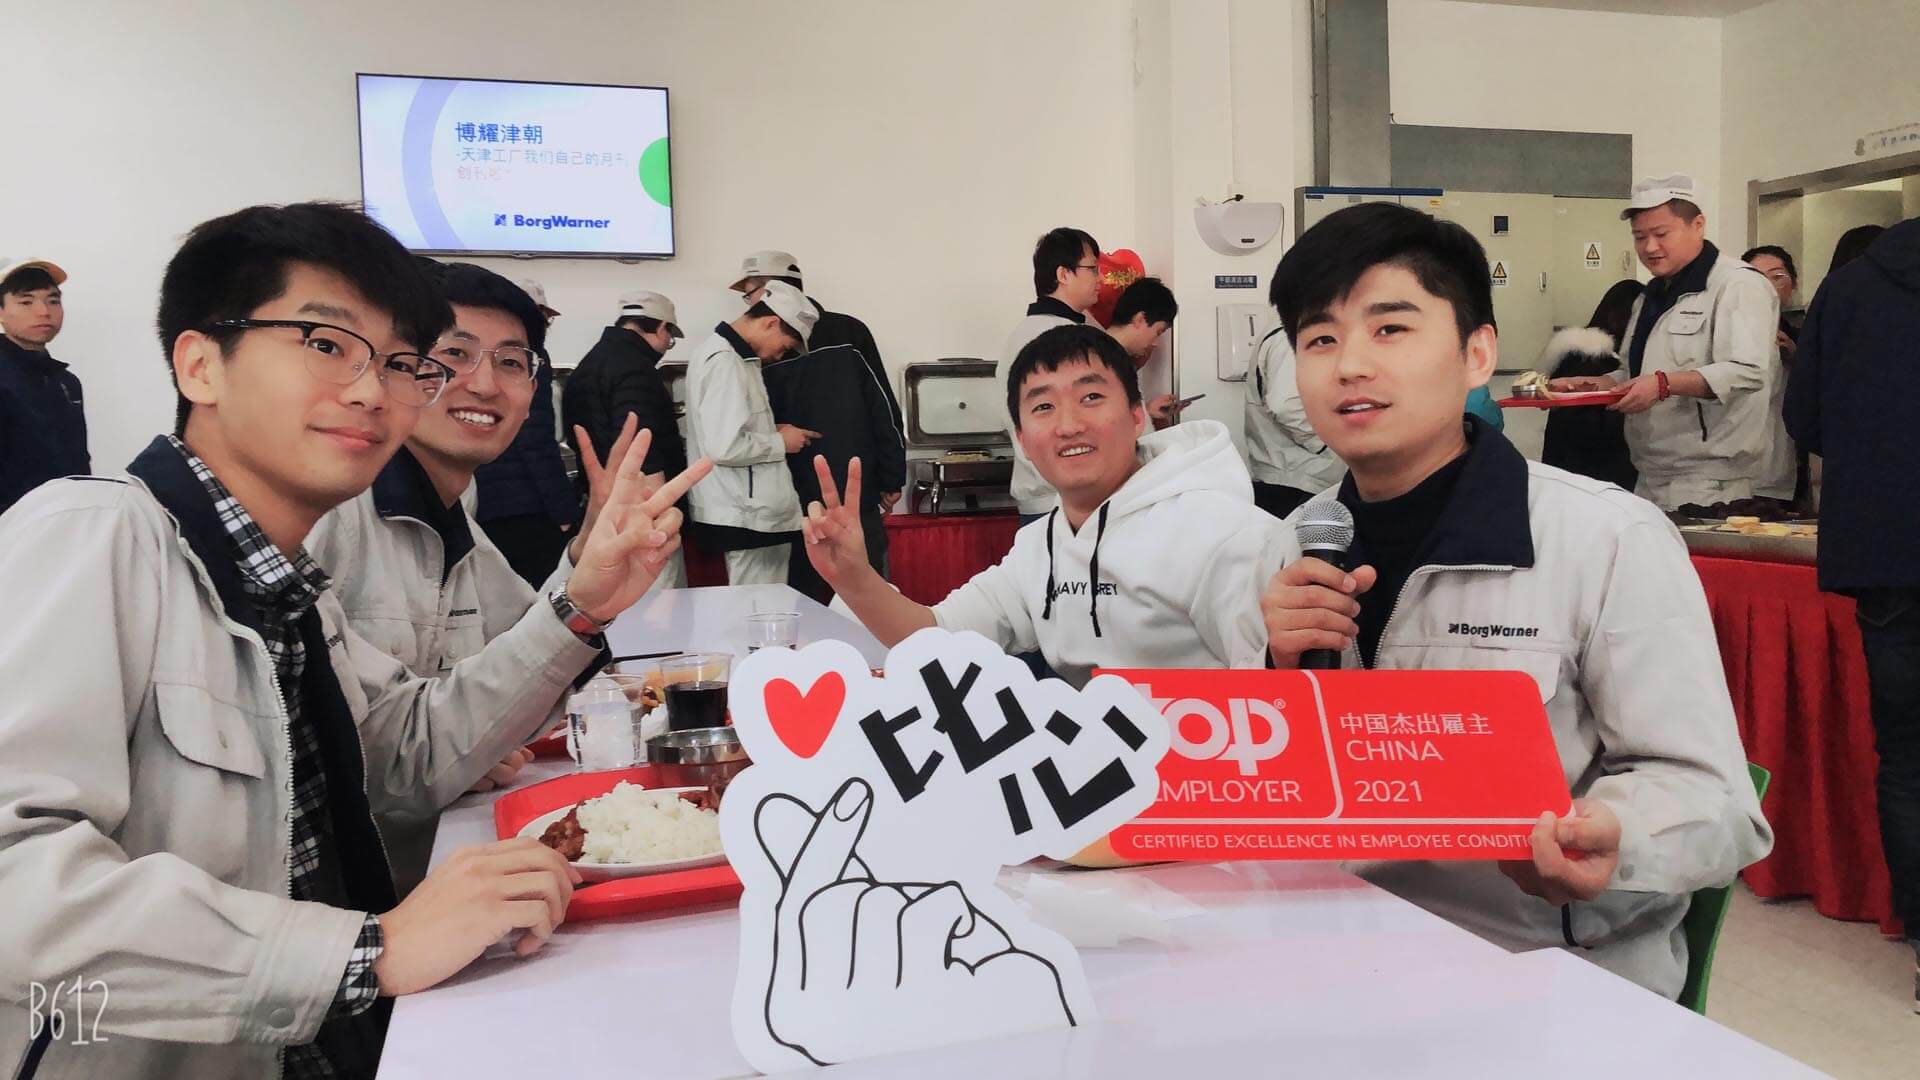 Individuals at a corporate event with signage indicating "Top Employer China 2021